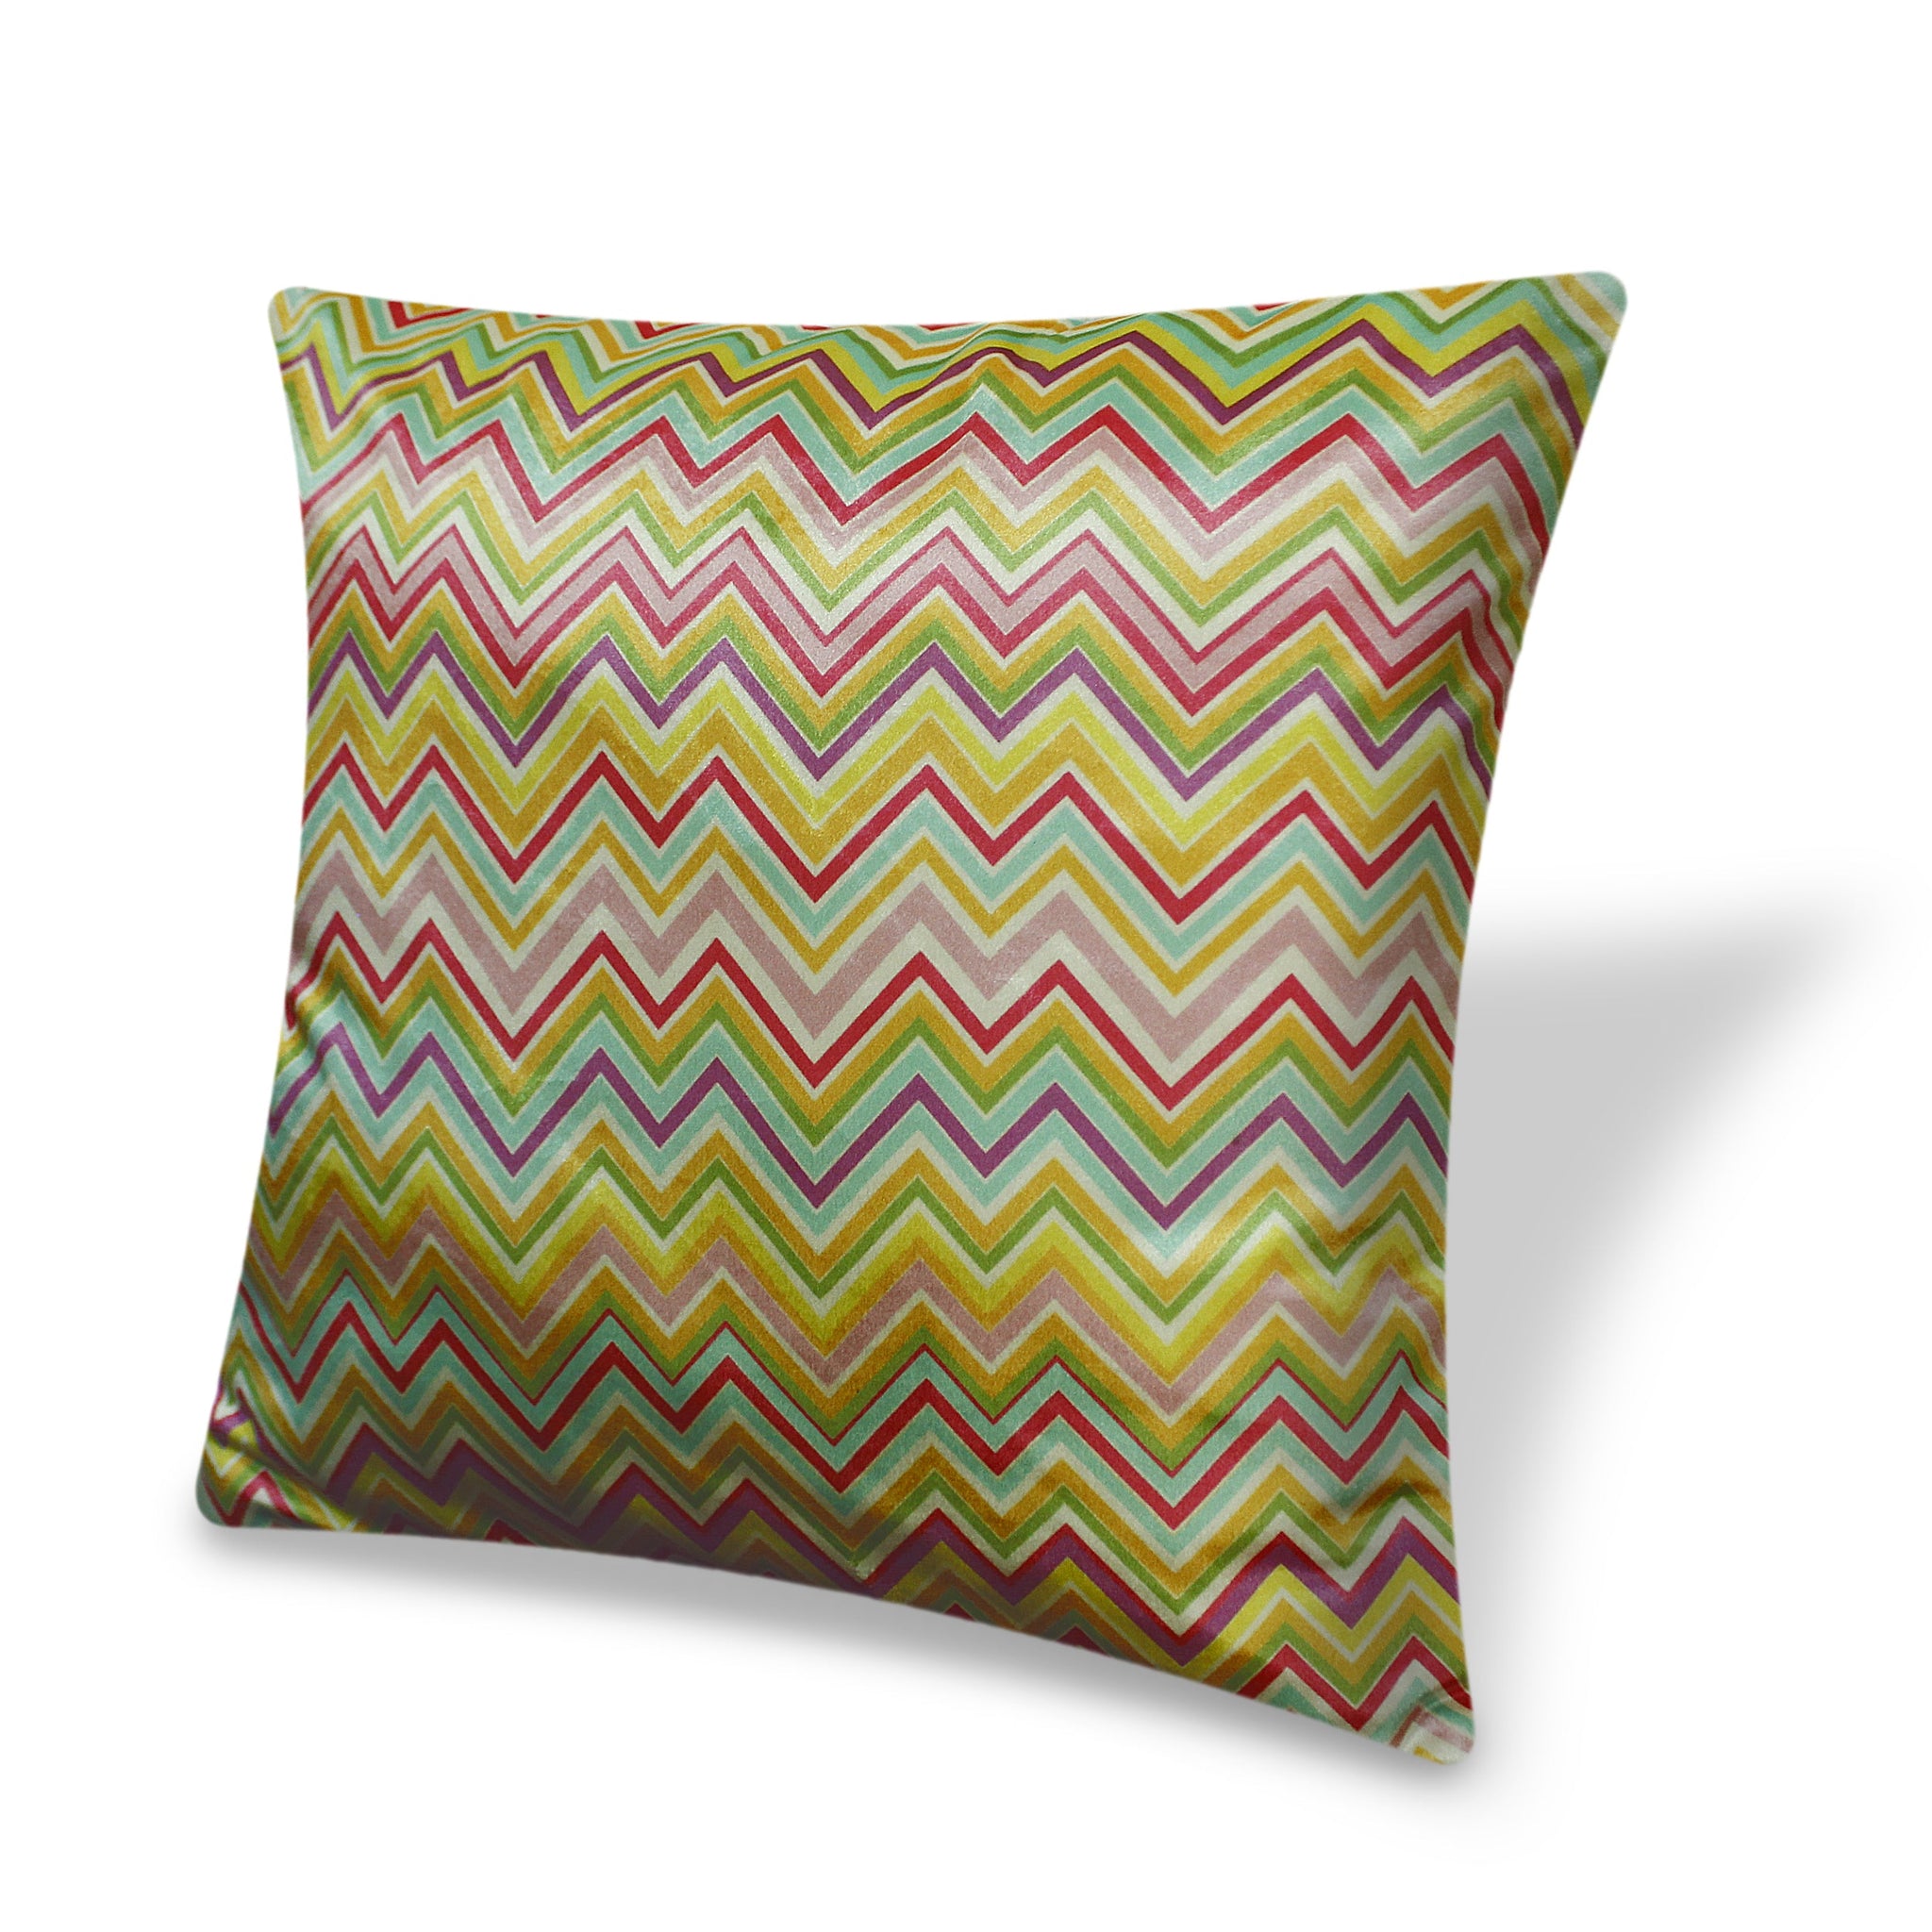  Velvet Cushion Cover Italian Missoni Inspired Zigzag Wave Decorative pillowcase, Home Decor Geometric Throw Pillow for Sofa Chair Bedroom Living Room Multi Color 45x45cm (18x18 Inches)